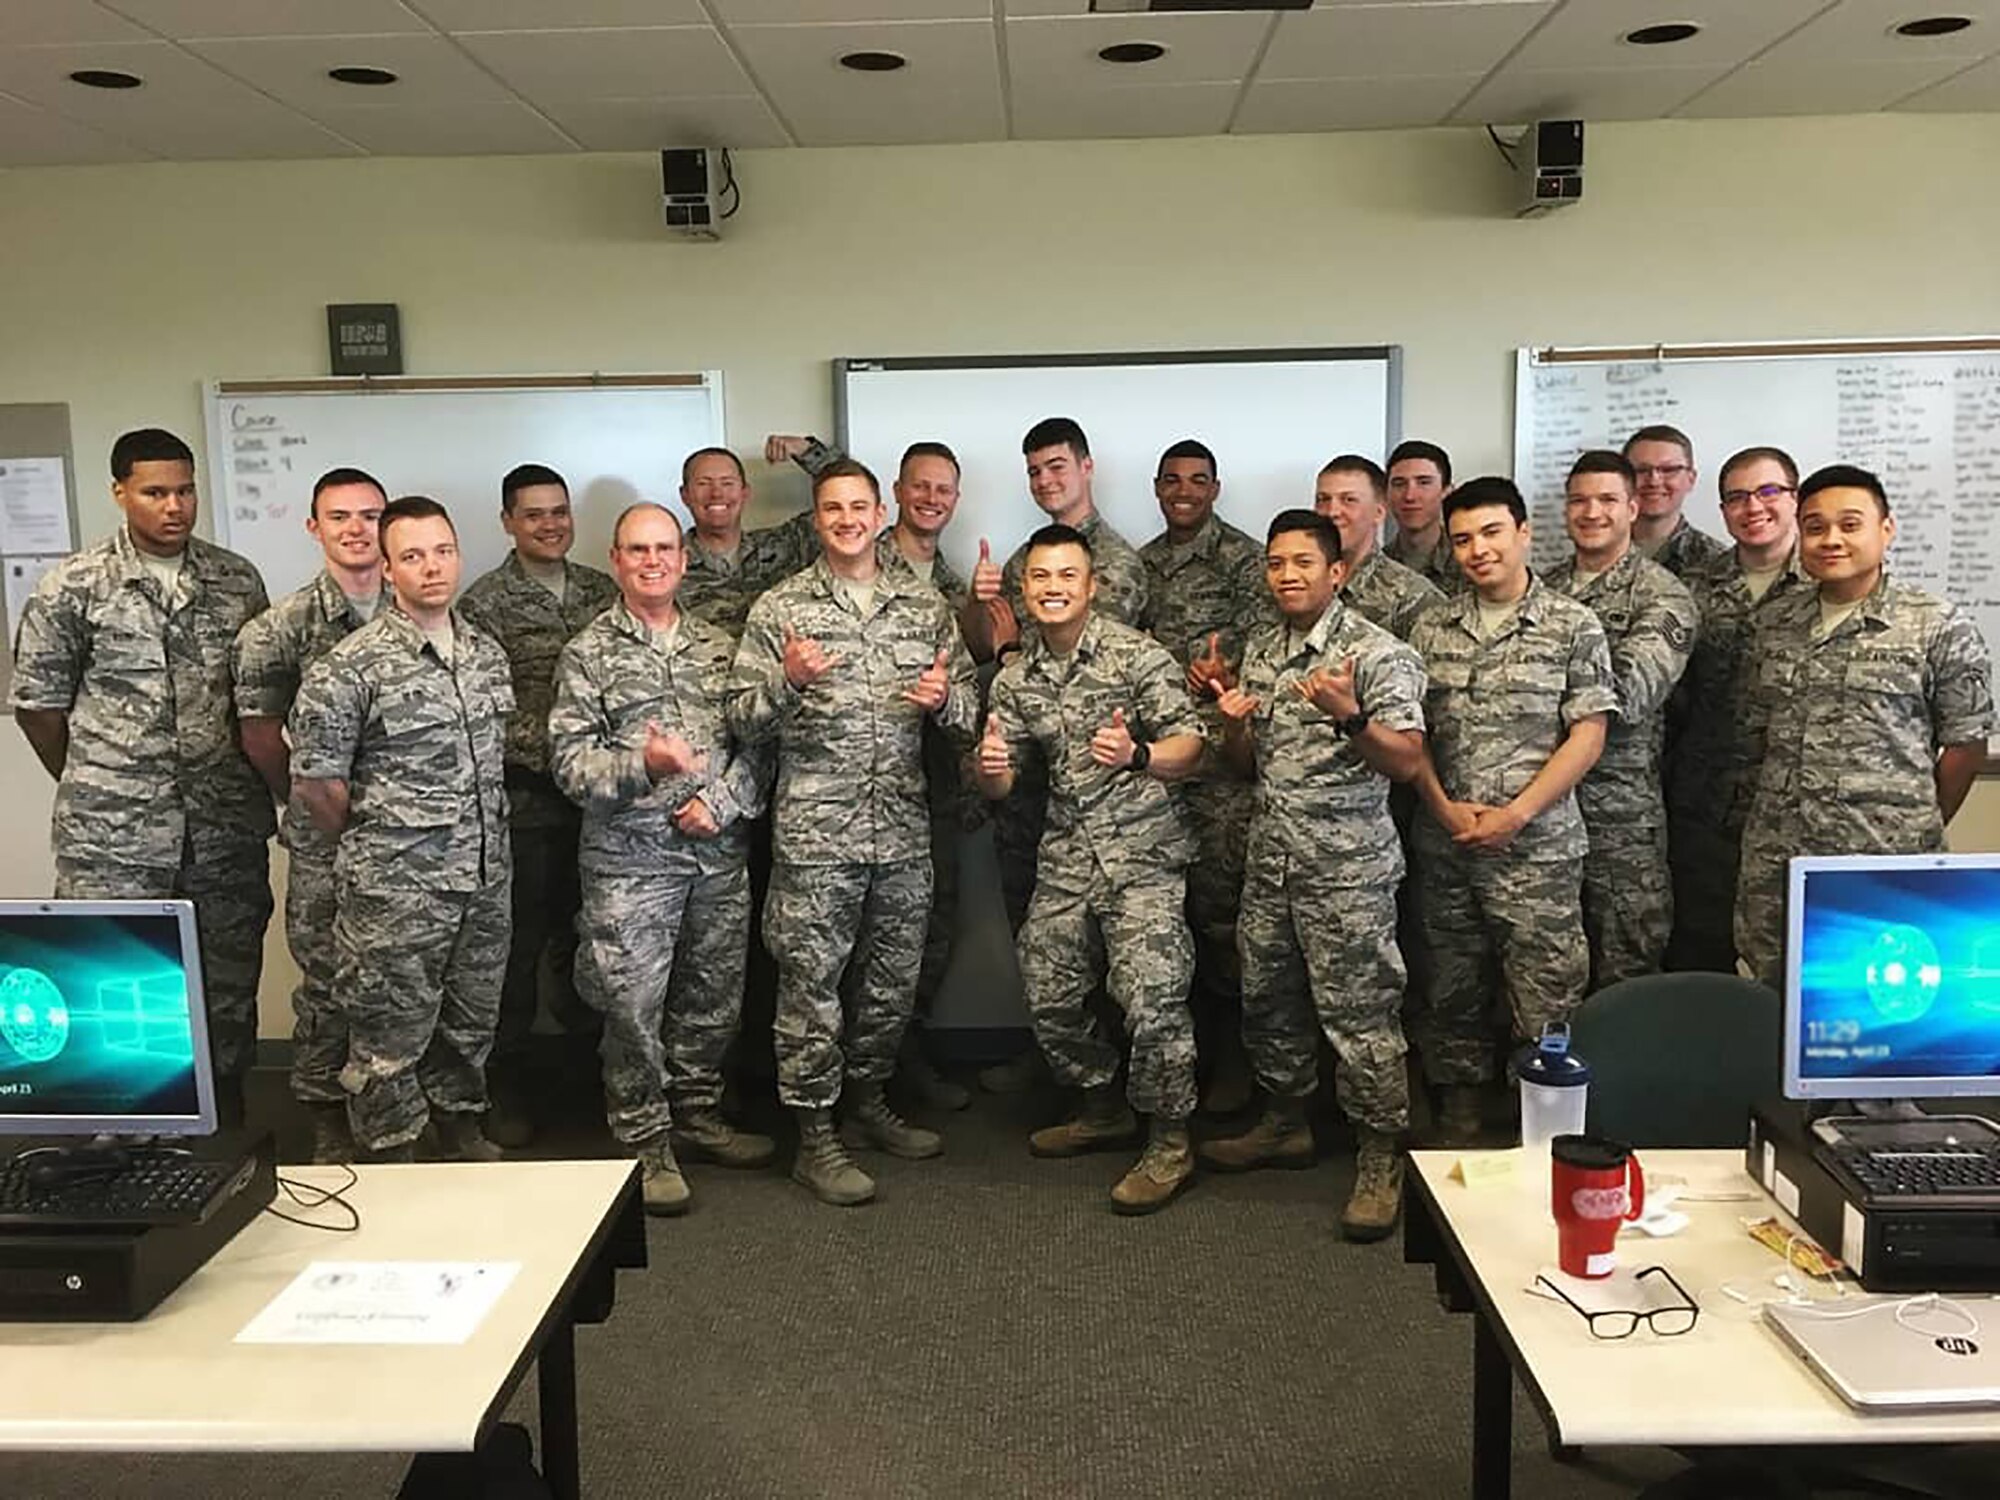 Shown here with is technical school class, Senior Airman Joe Chau, 718th Intelligence Squadron cyber systems operations technician, distinguish himself at technical school not only as a student, but also as a tutor. While there, he initiated an informal tutoring group which quickly grew from three classmates to more than 40 participants, promoted and endorsed by his tech school instructors.